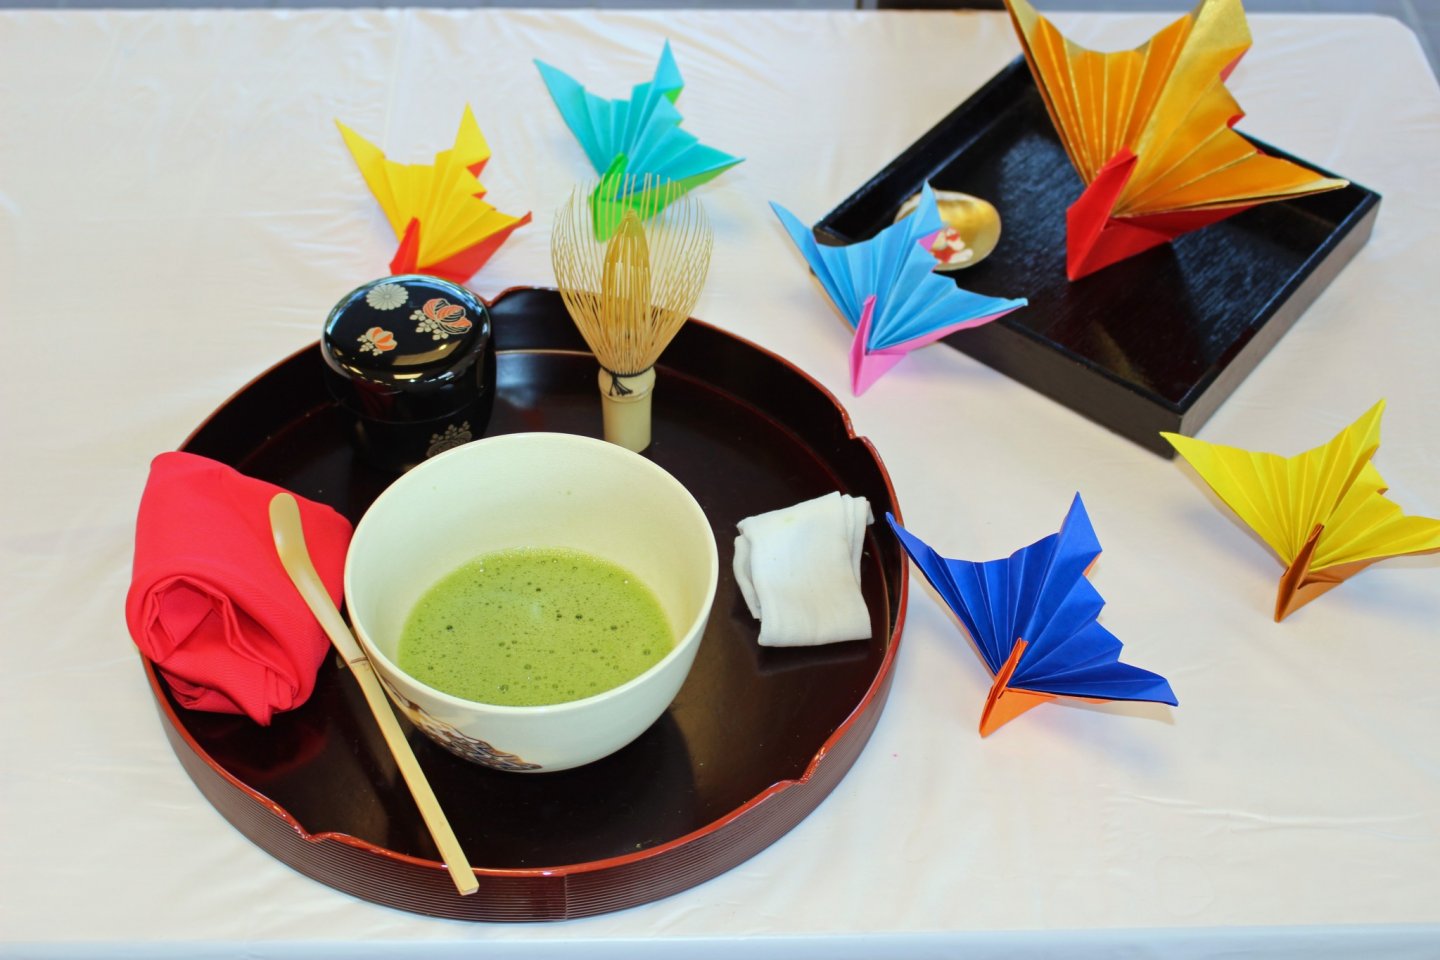 The simple and beautiful tea ceremony set at the NARA Visitor Center